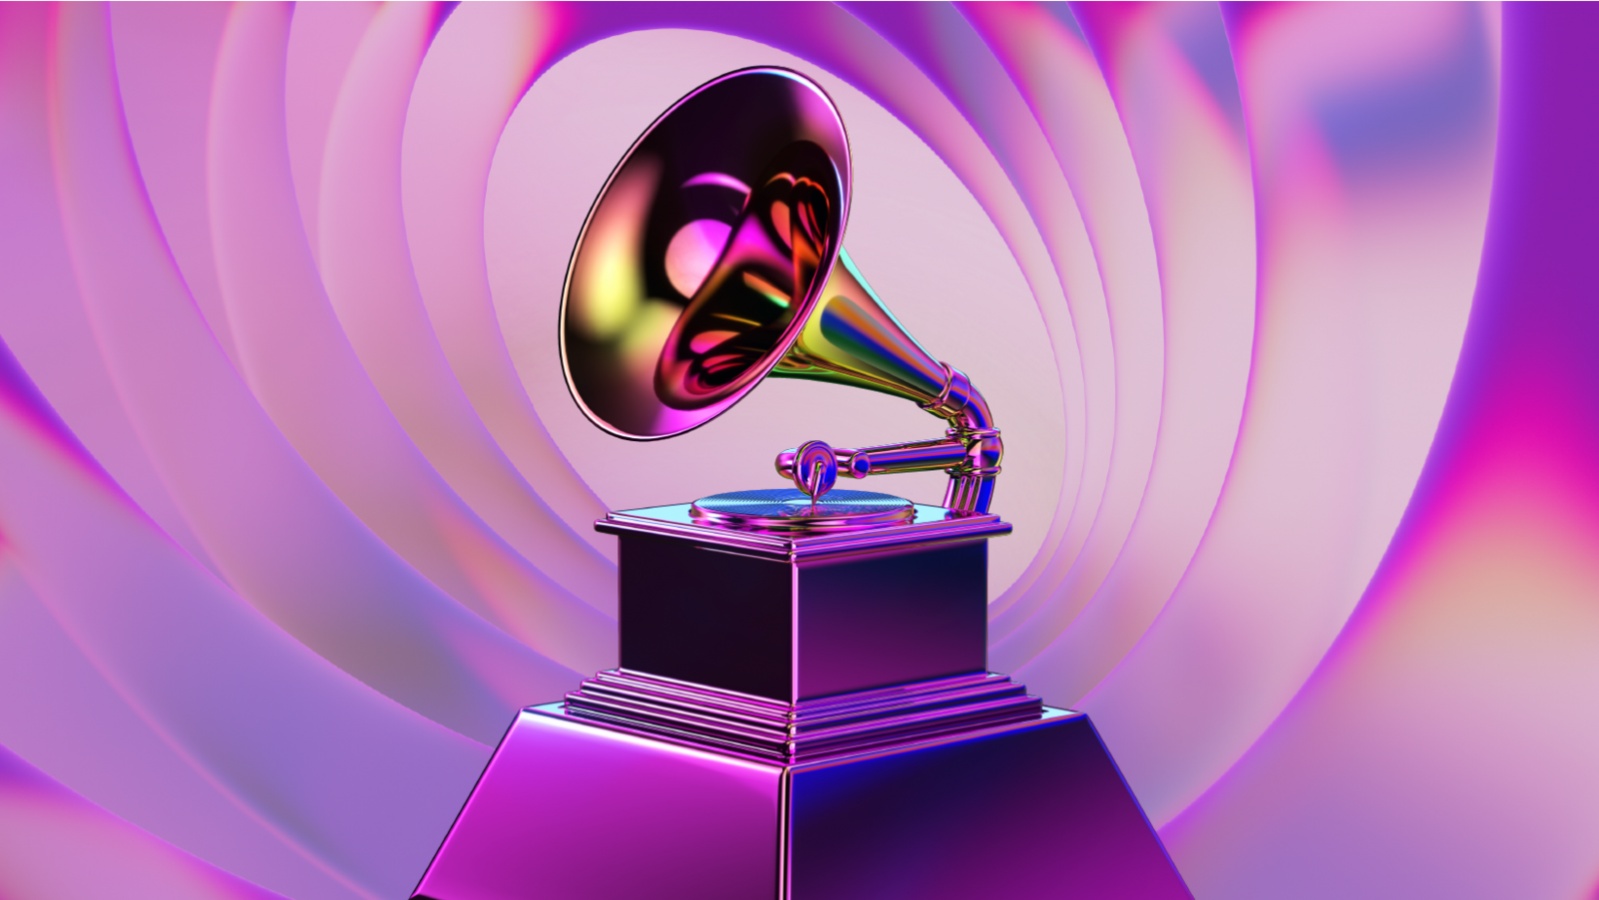 Podcast: Inside the 2022 Grammys, From BTS to Billie Eilish